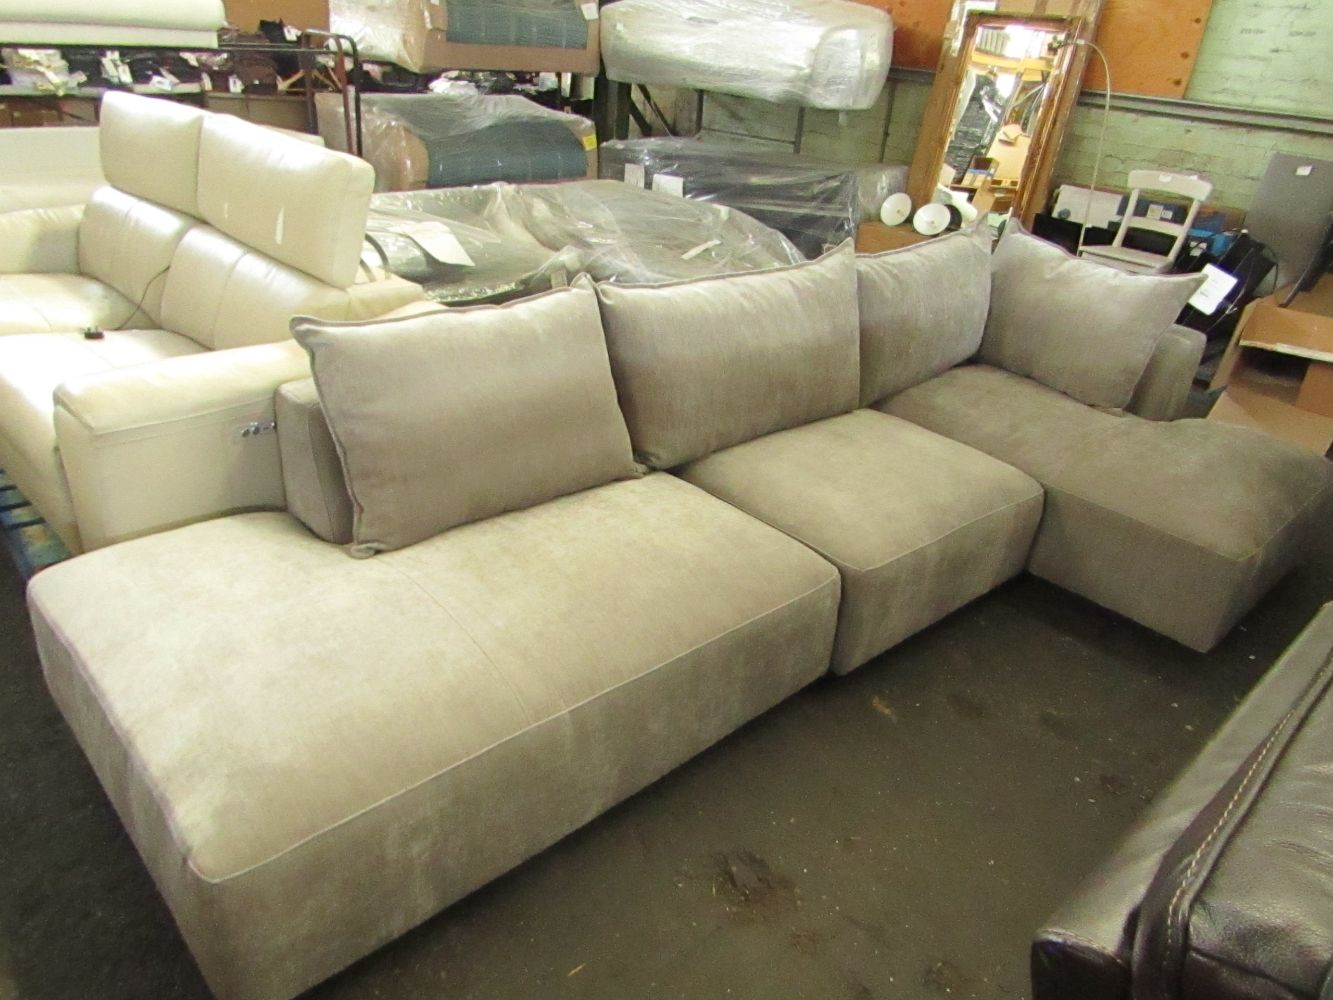 Sofas and Chairs from Made.com, Costco, Cavendish, Swoon, Cox and More